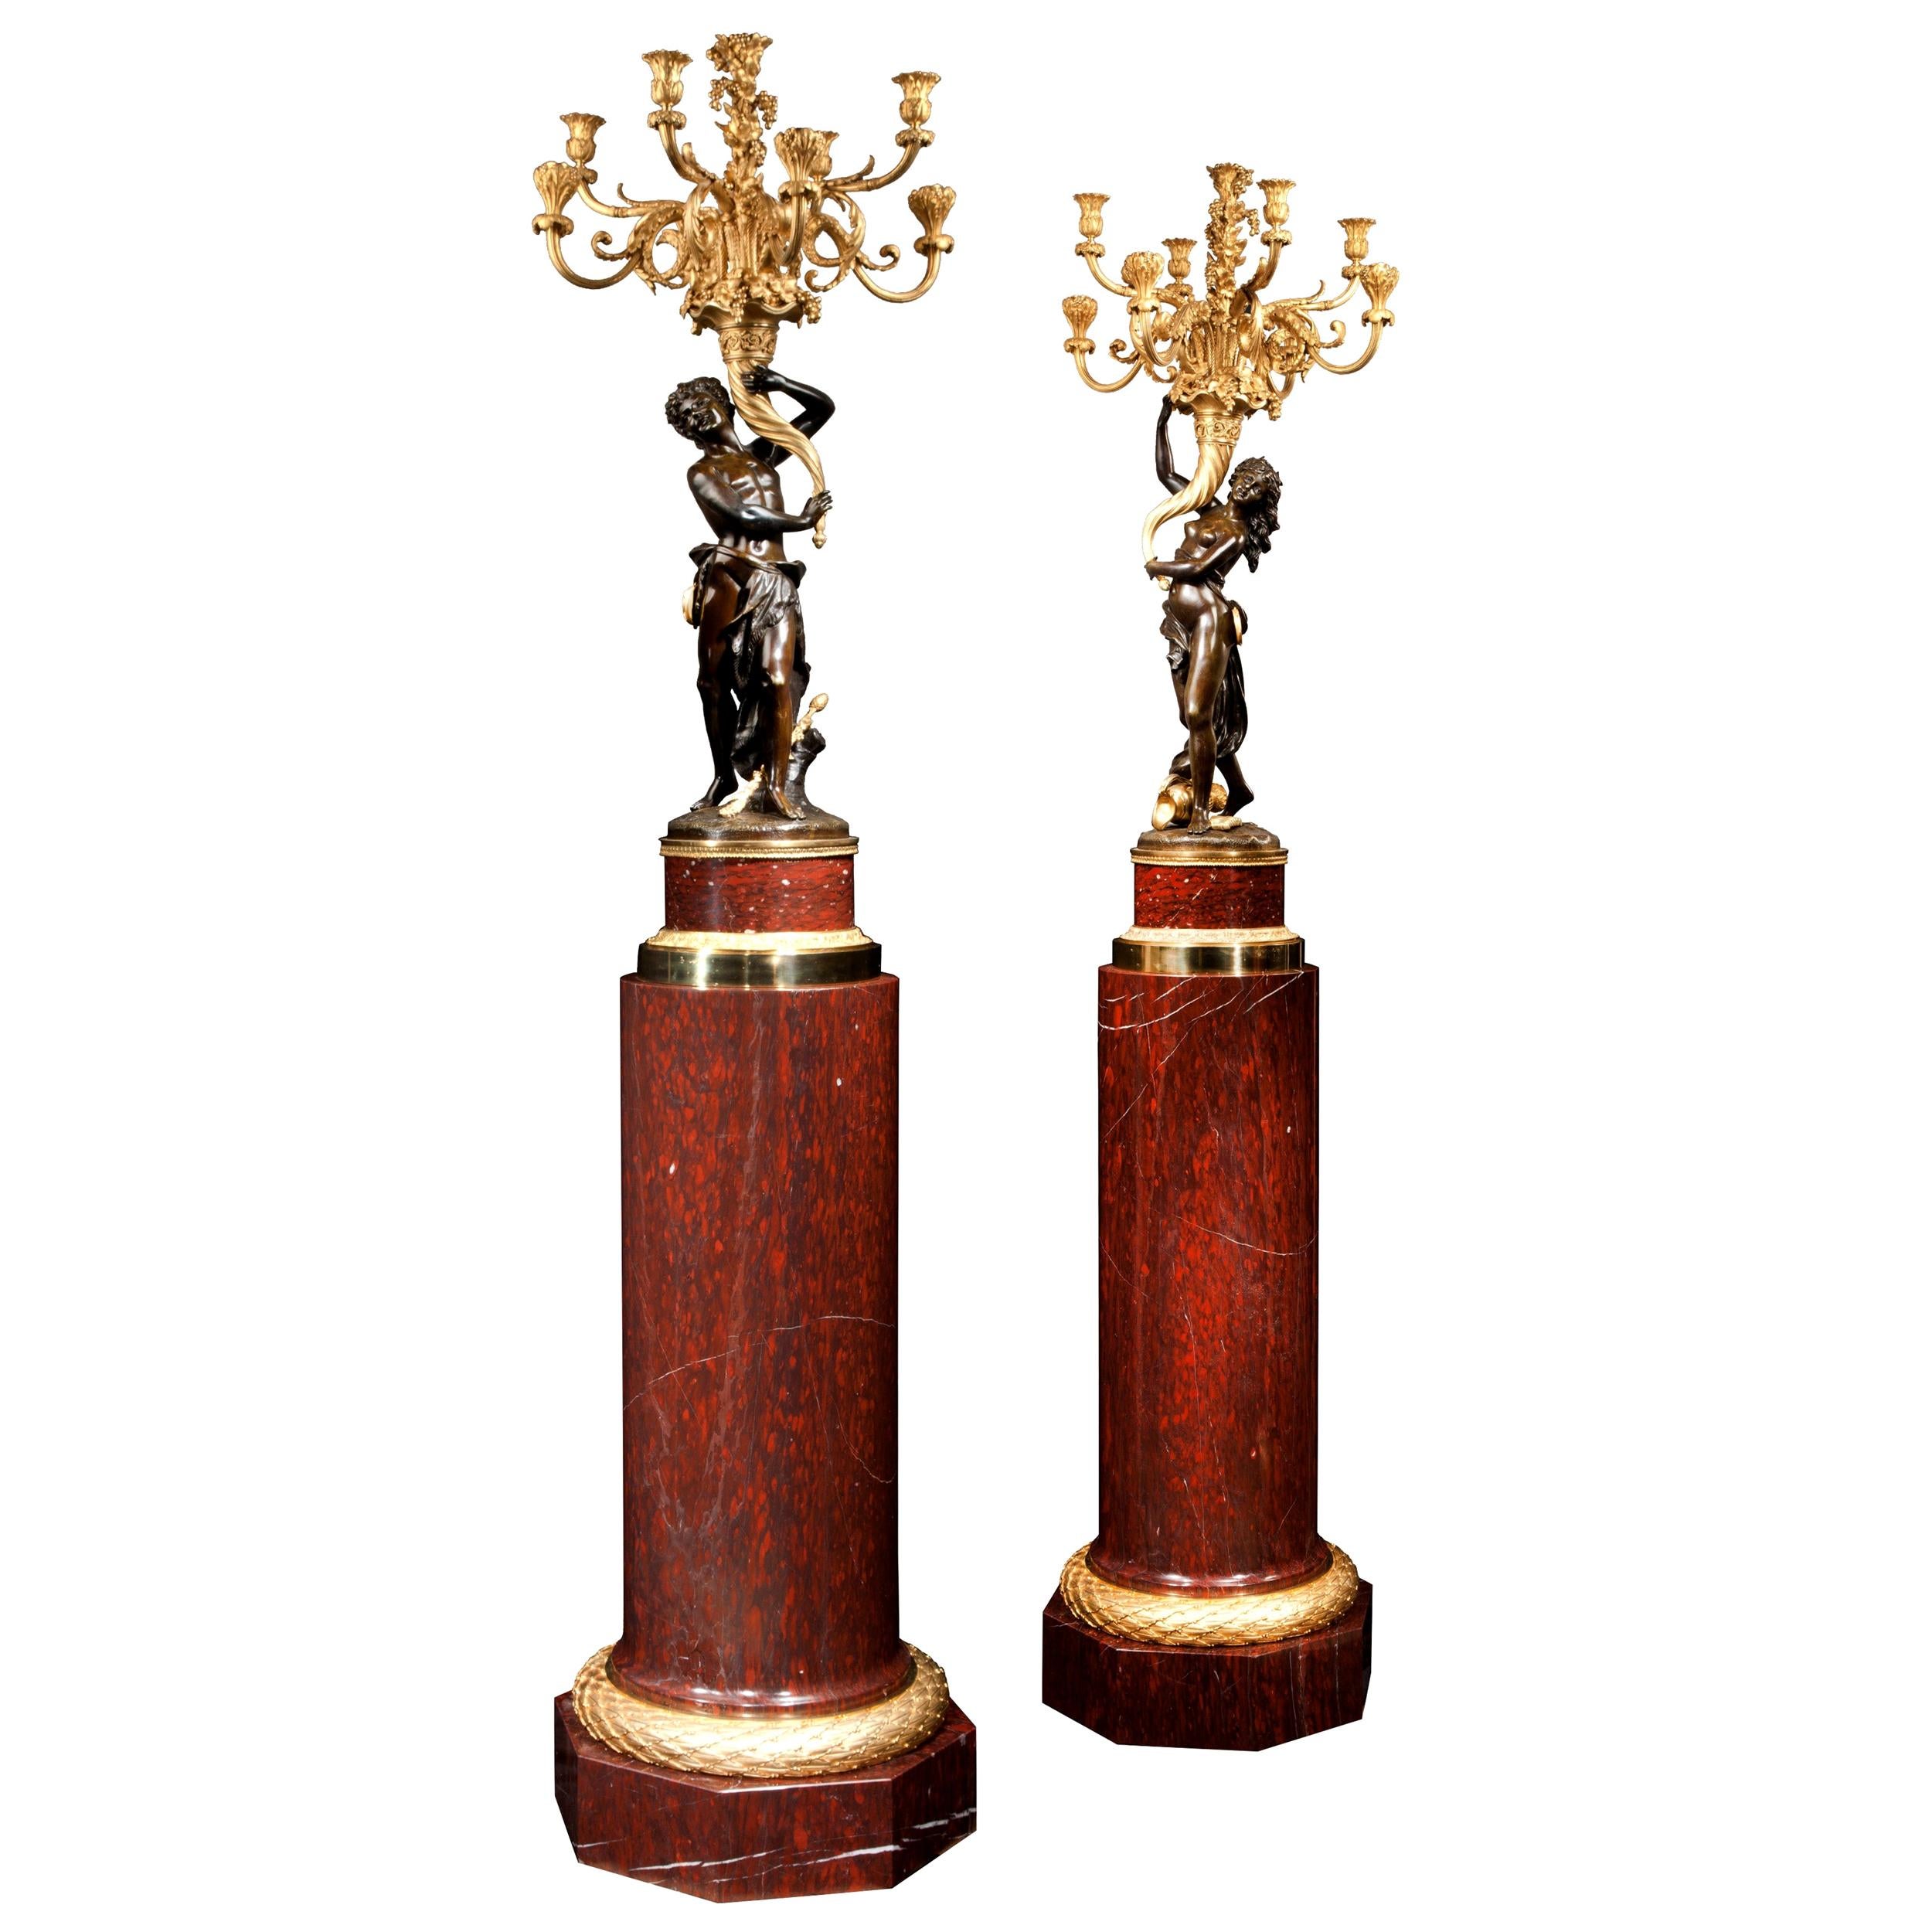 Magnificent Pair of Louis XVI Candelabra after Clodion